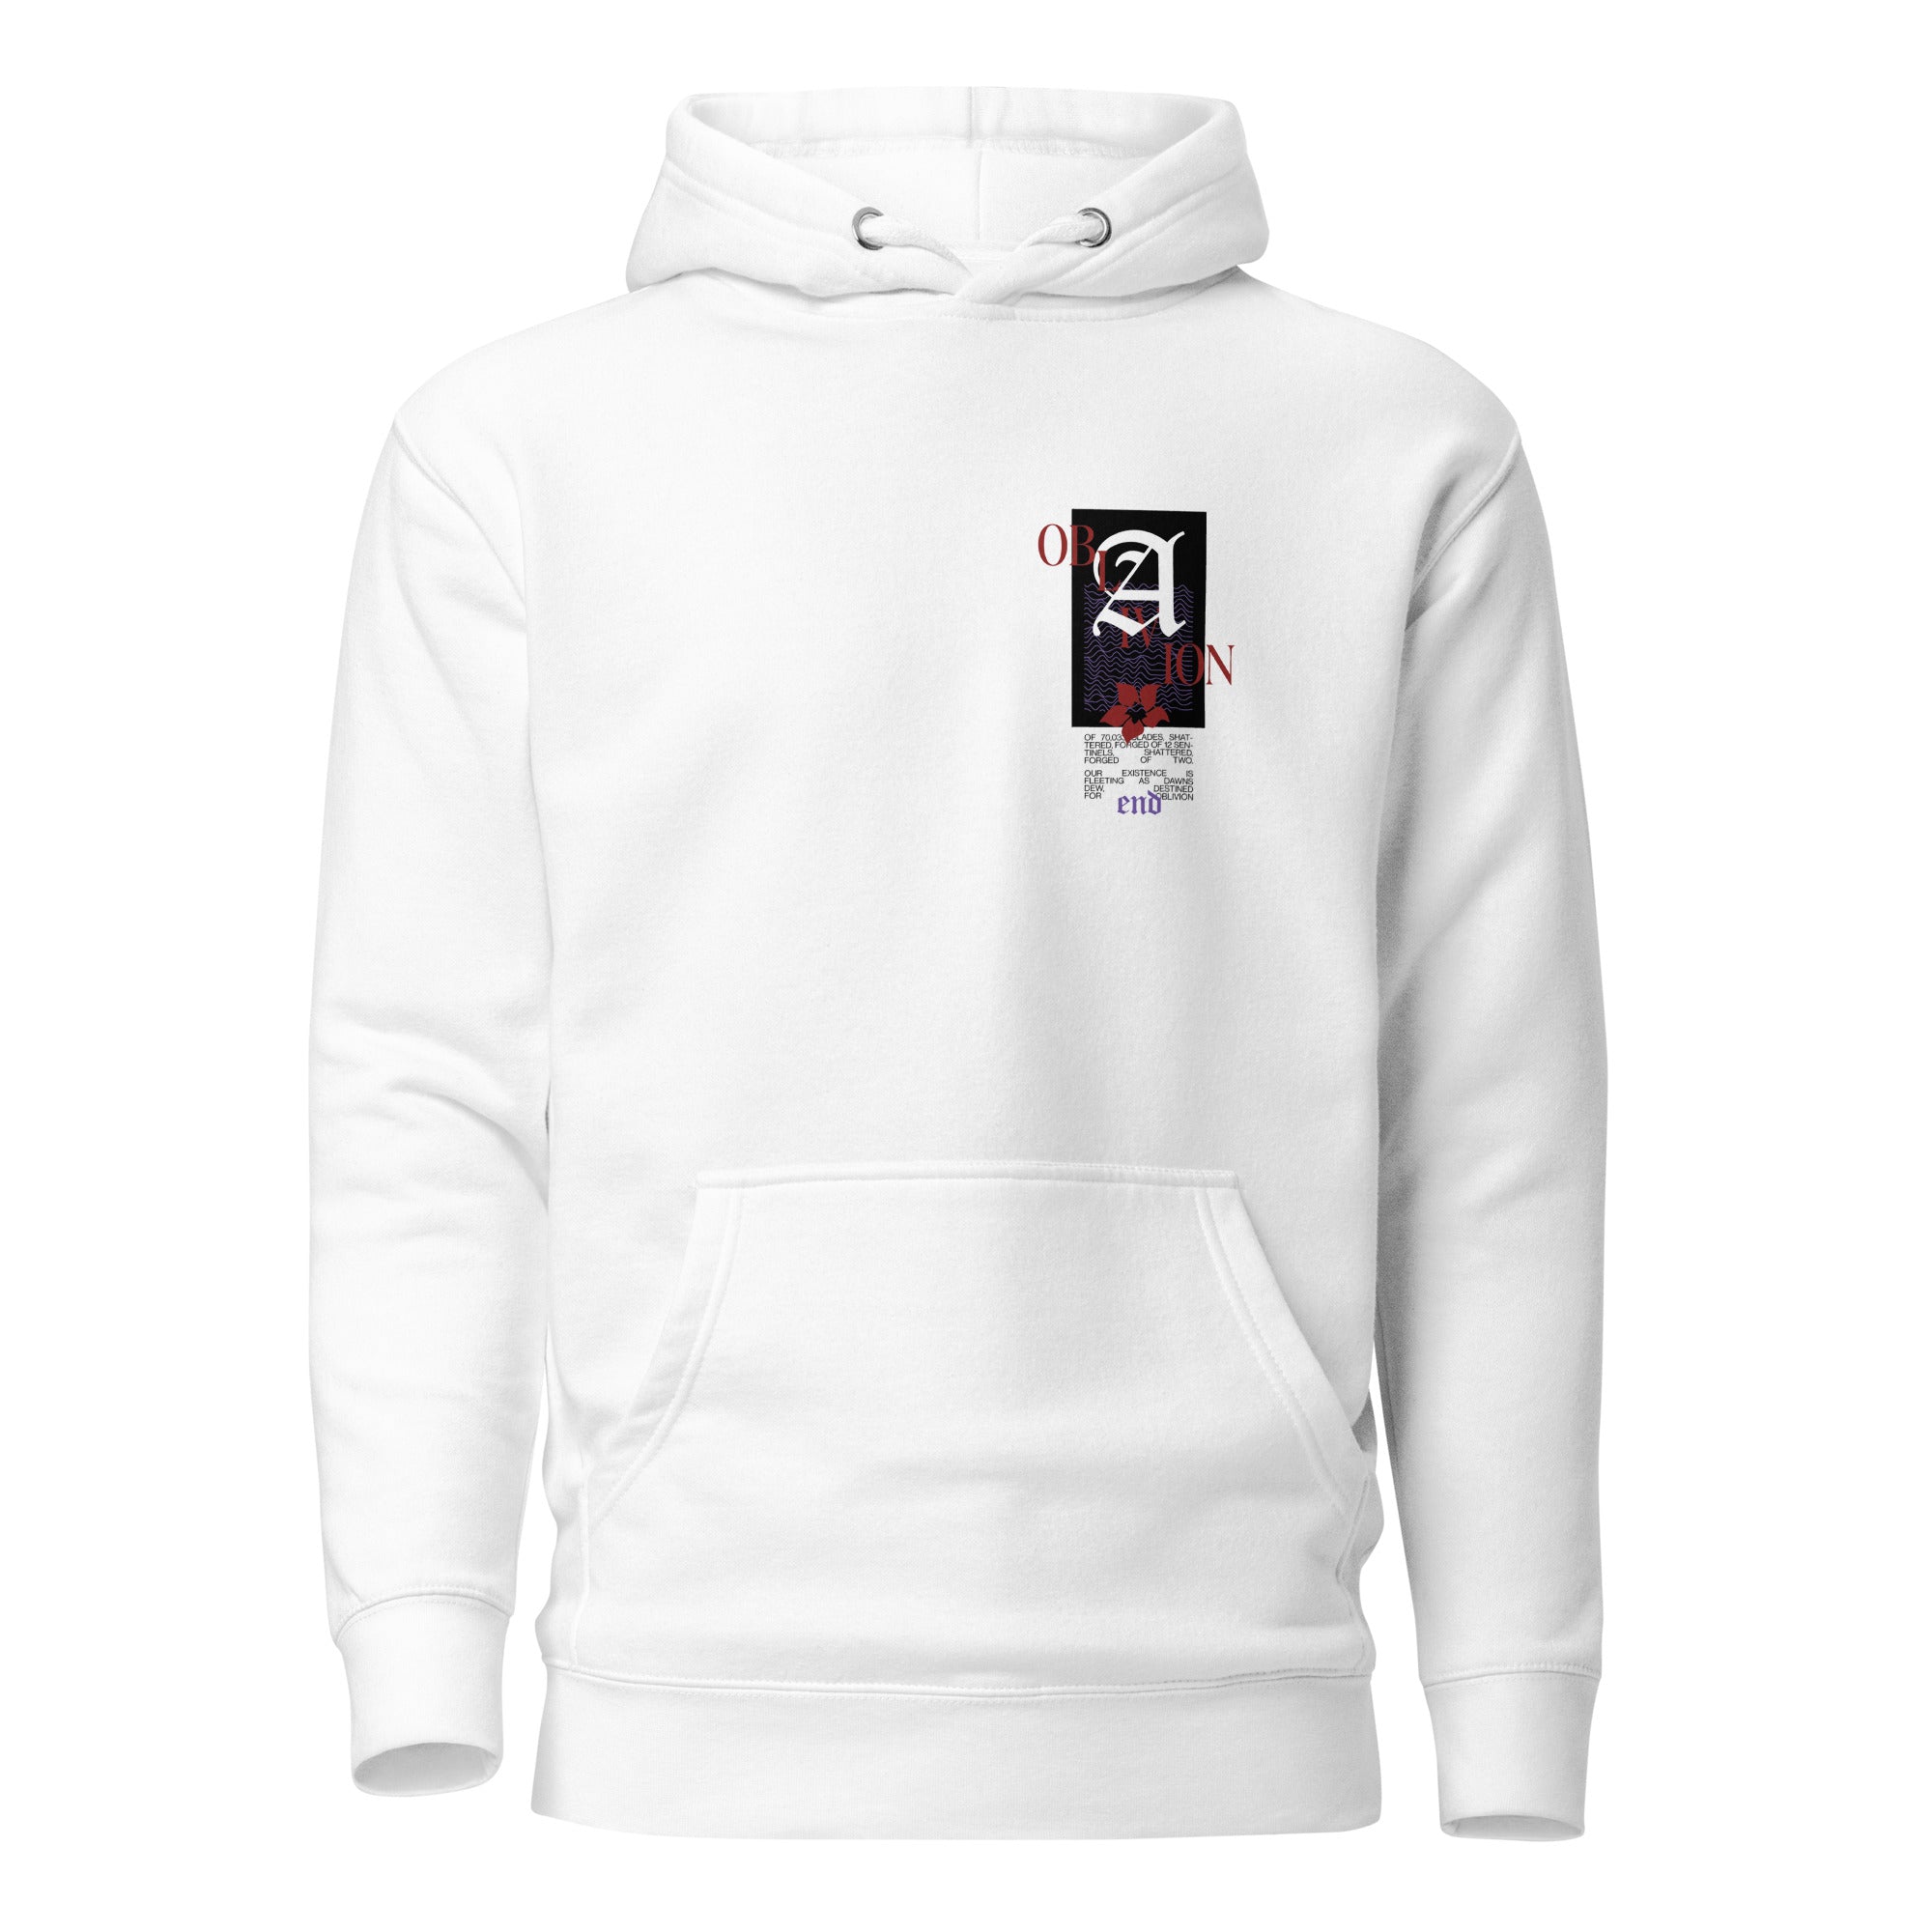 IN YORE'S EMBRACE • hoodie - Jackler - anime-inspired streetwear - anime clothing